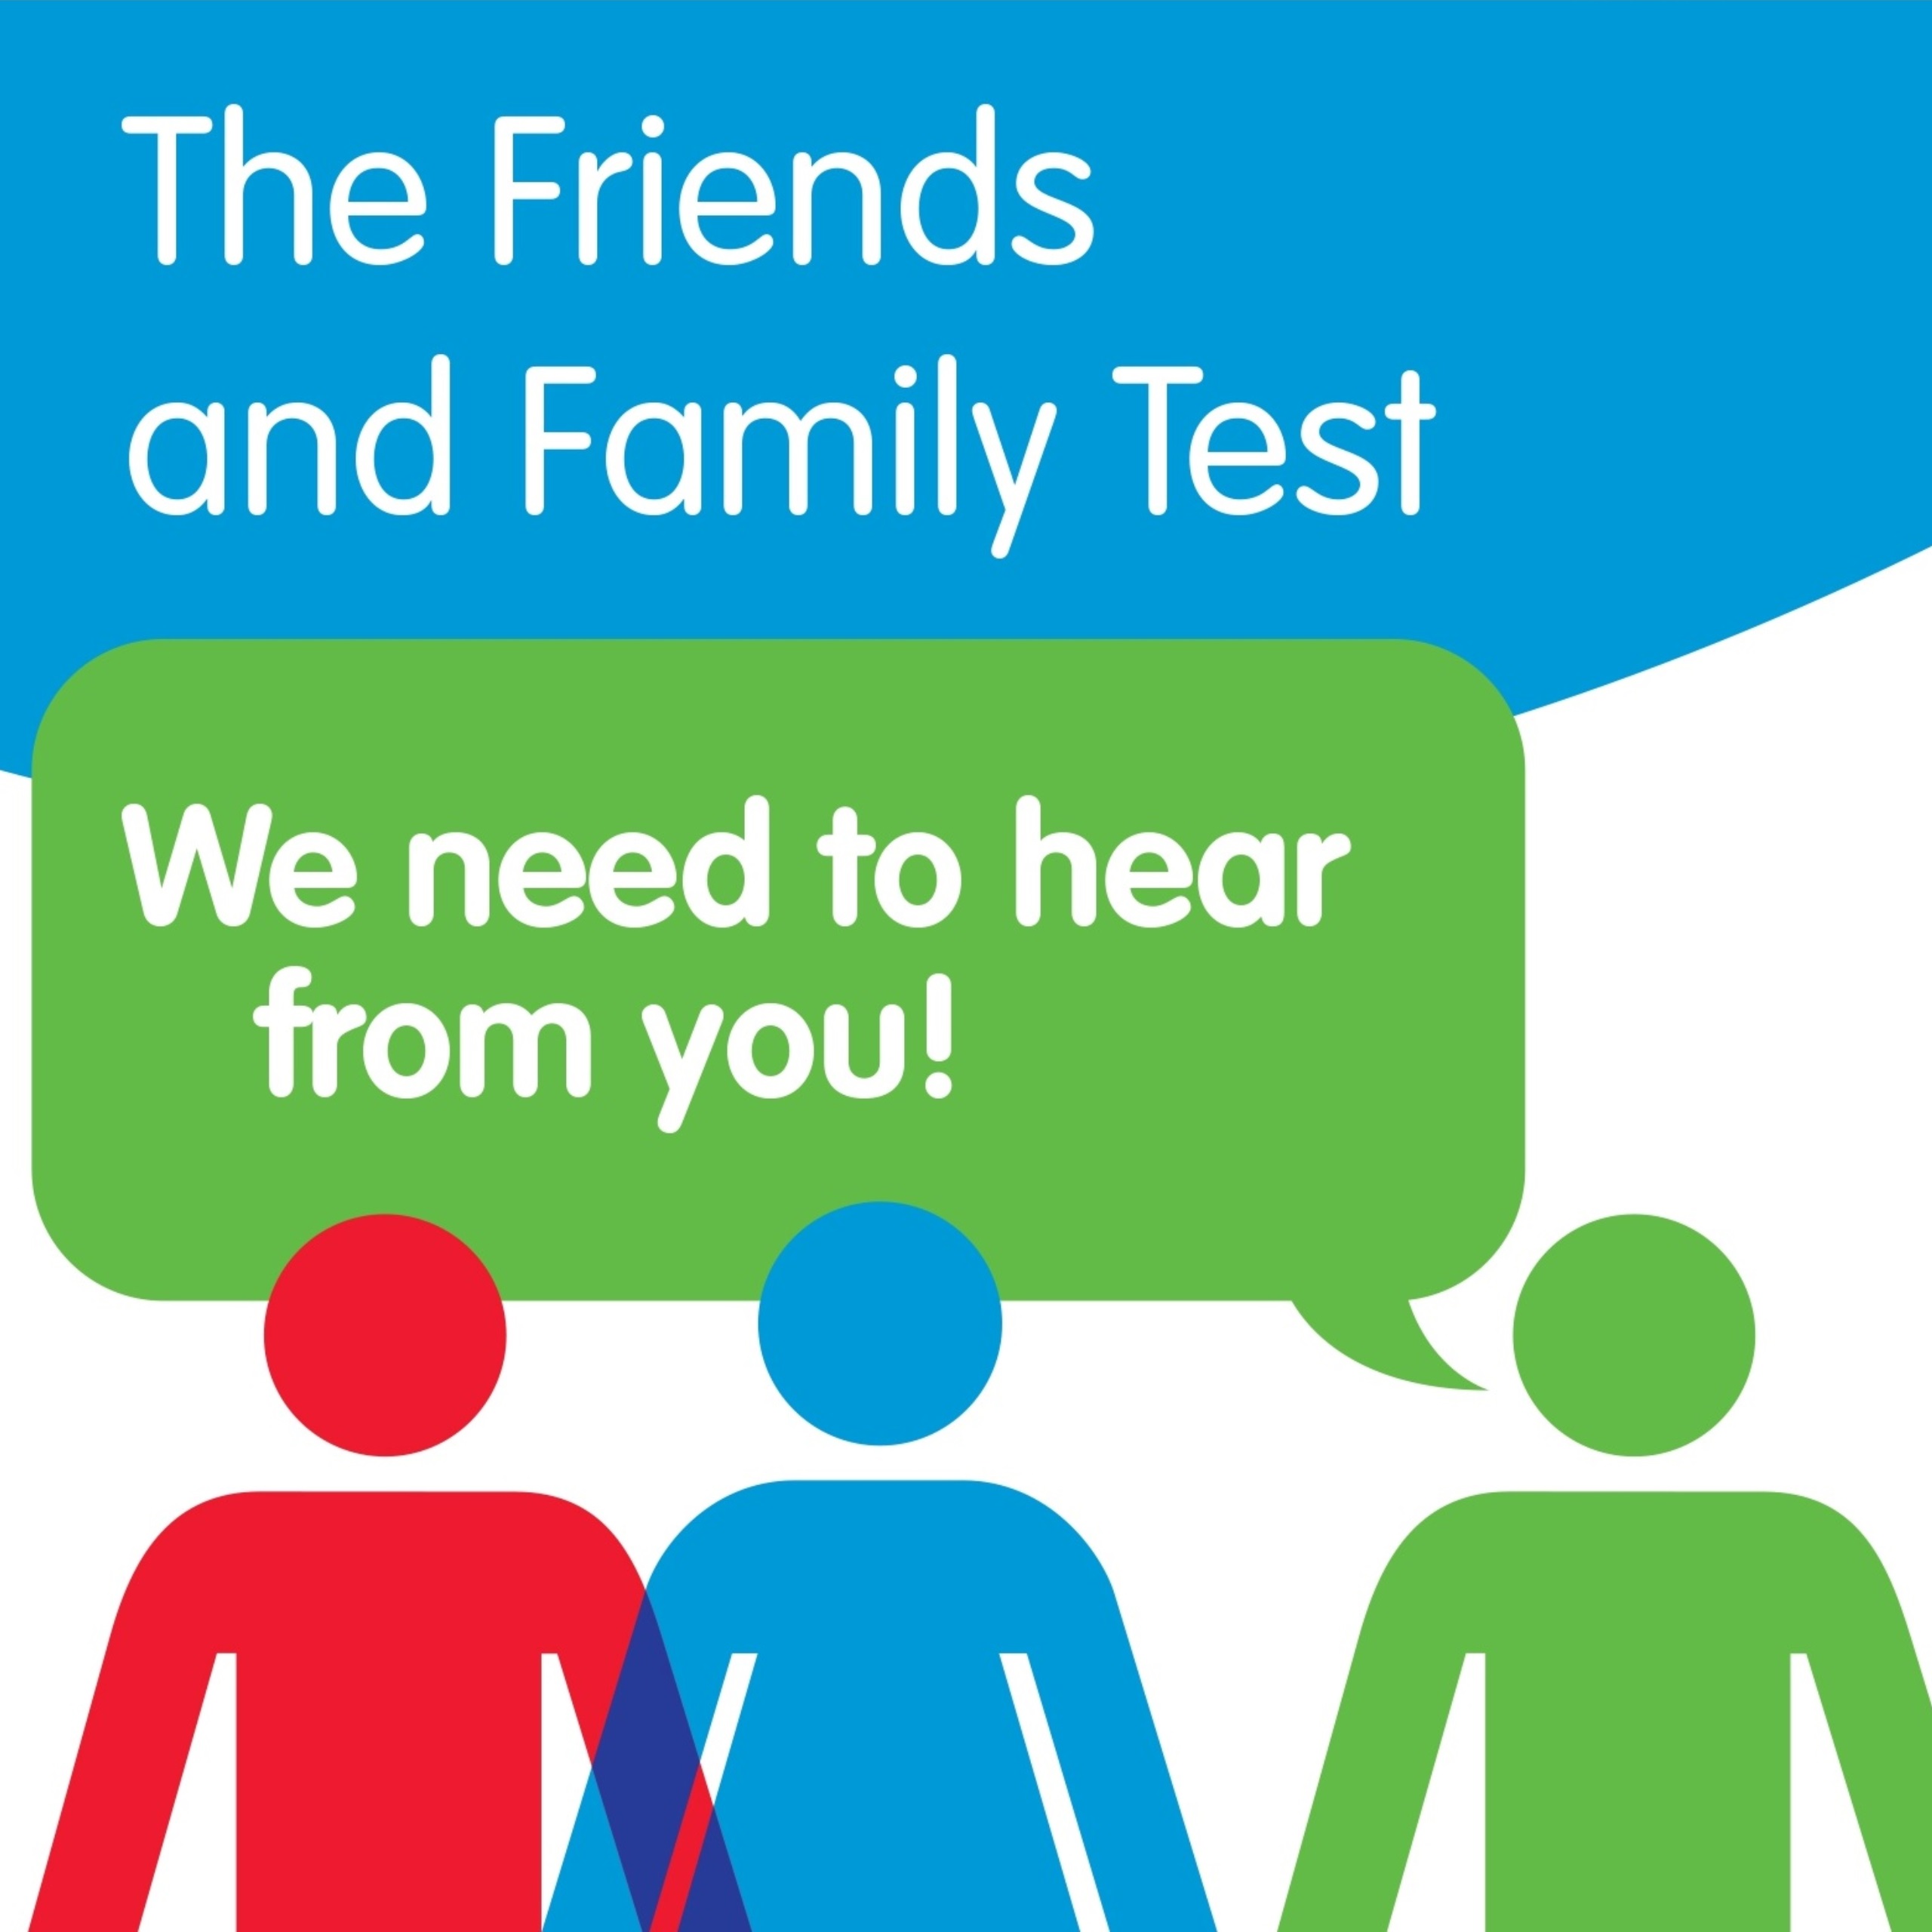 The NHS friends and family test (FFT) is an important opportunity for you to provide feedback on the care and treatment…